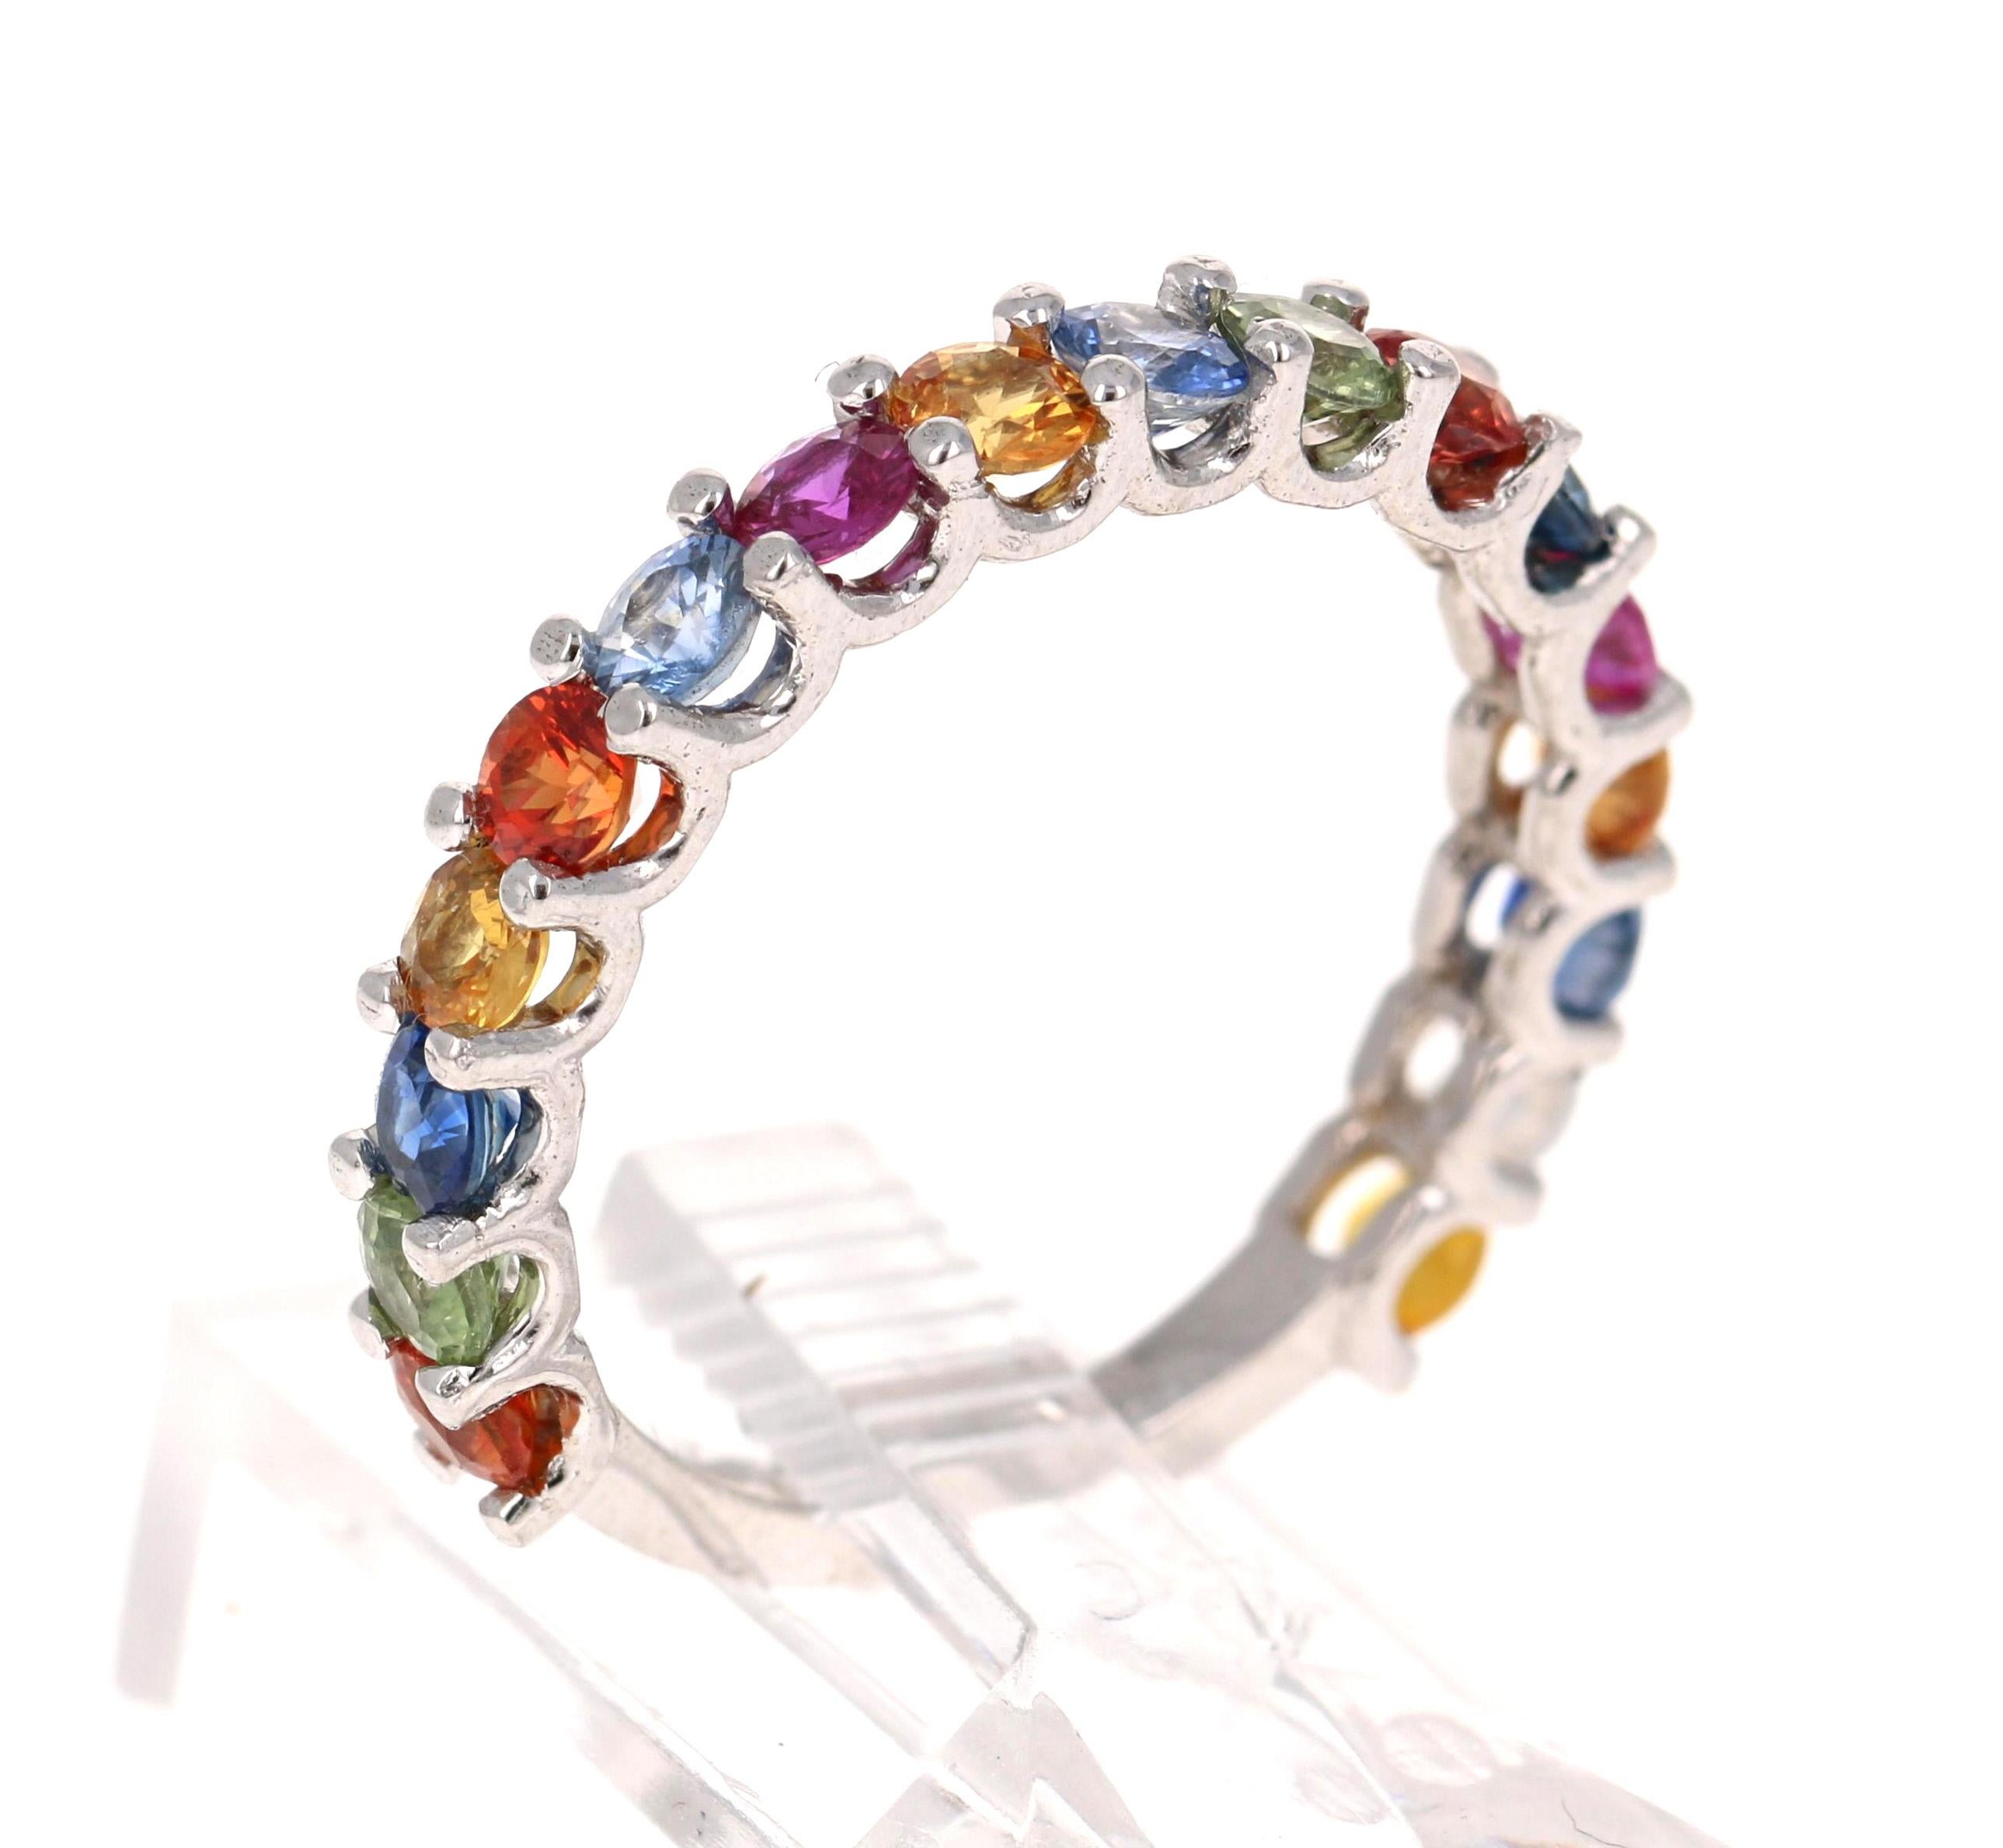 2.65 Carat Multicolored Sapphire 14 Karat White Gold Stackable Band!

There are 17 Multicolored Genuine Sapphires in this band that weigh 2.65 Carats.  
It is perfect for everyday wear and looks amazing stacked or alone.  They are versatile and can